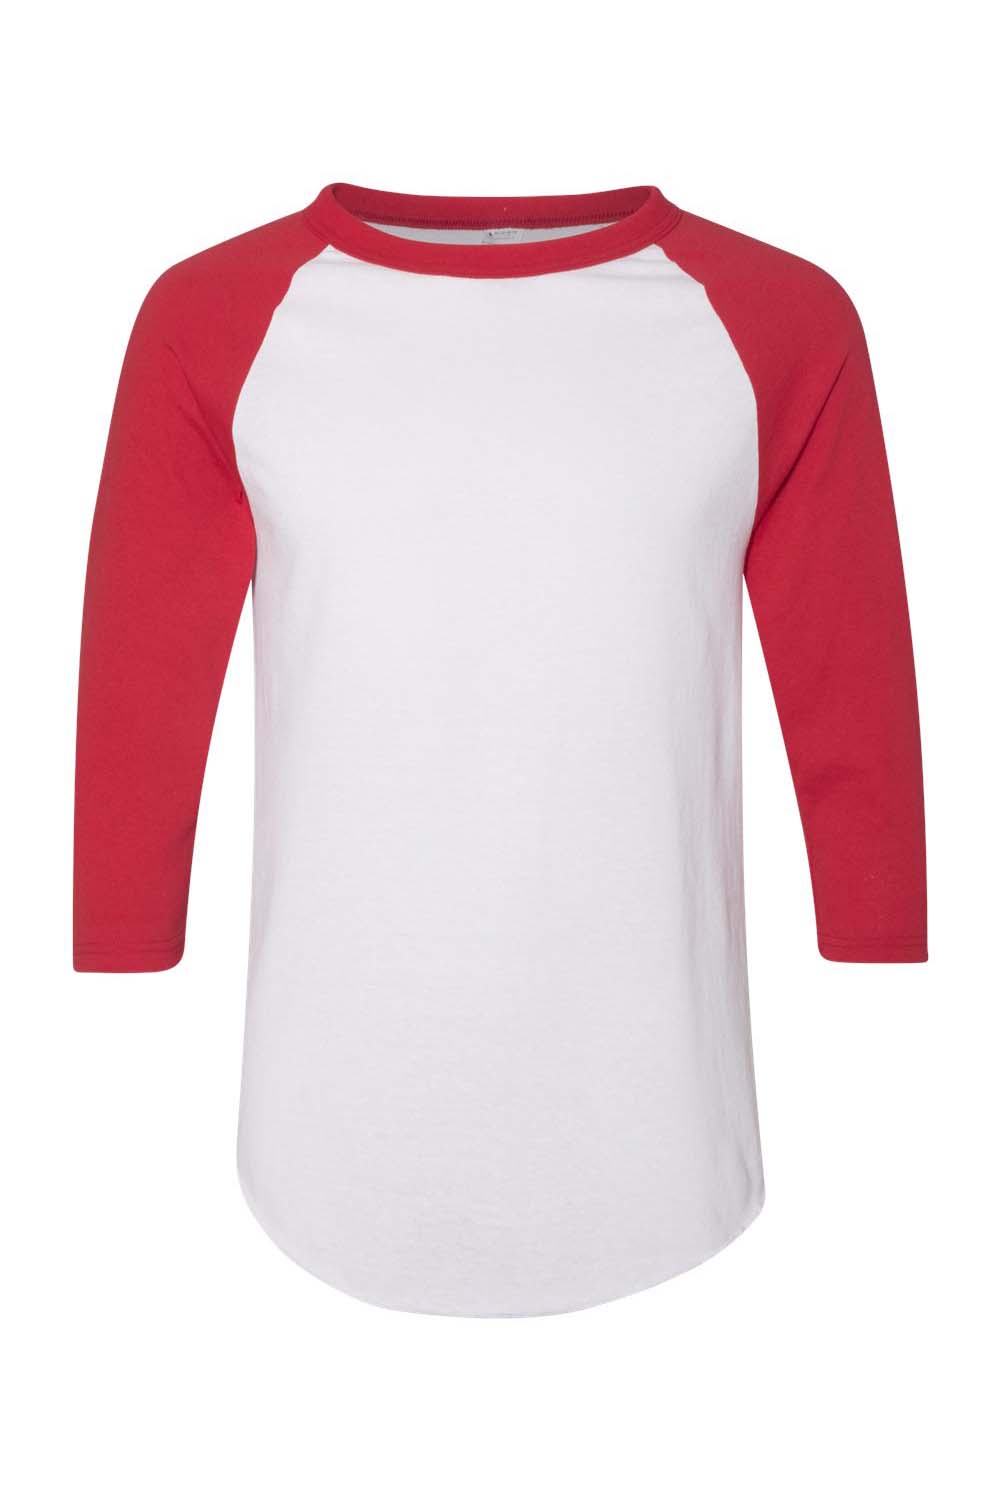 Augusta Sportswear AG4420/4420 Mens 3/4 Sleeve Crewneck T-Shirt White/Red Model Flat Front